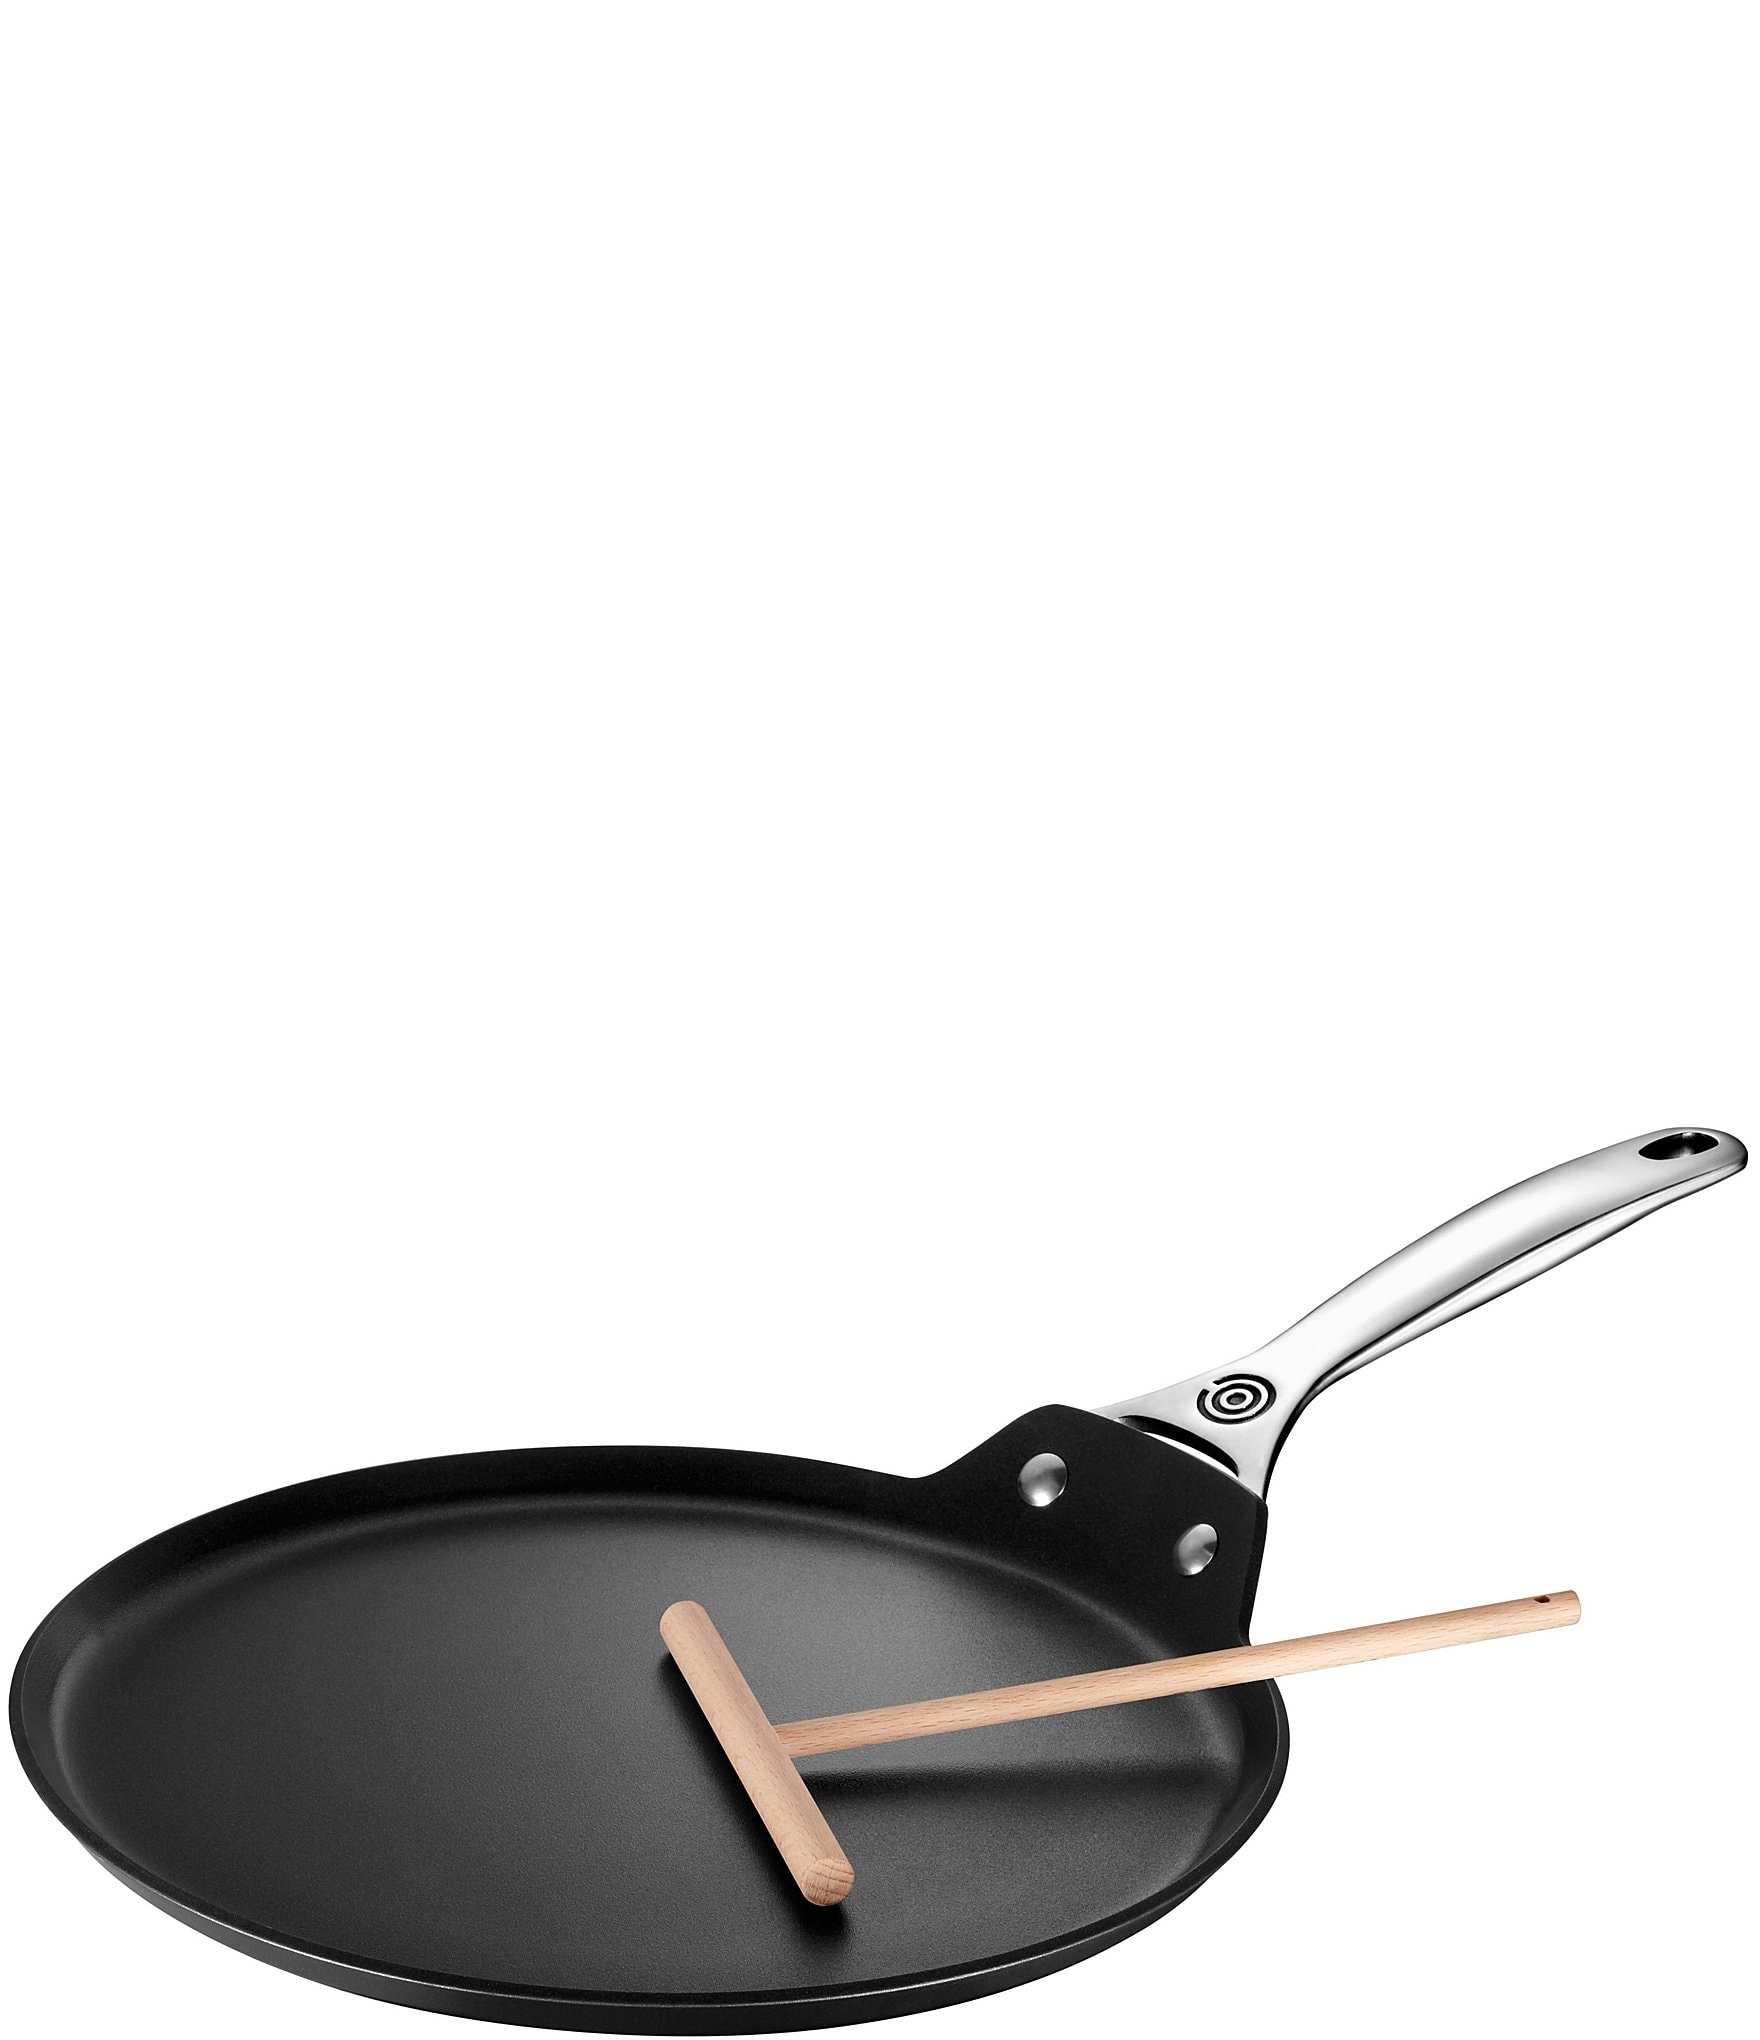 Cook Crepes like a Pro with Le Creuset's Nonstick Crepe Pan, Food &  Nutrition